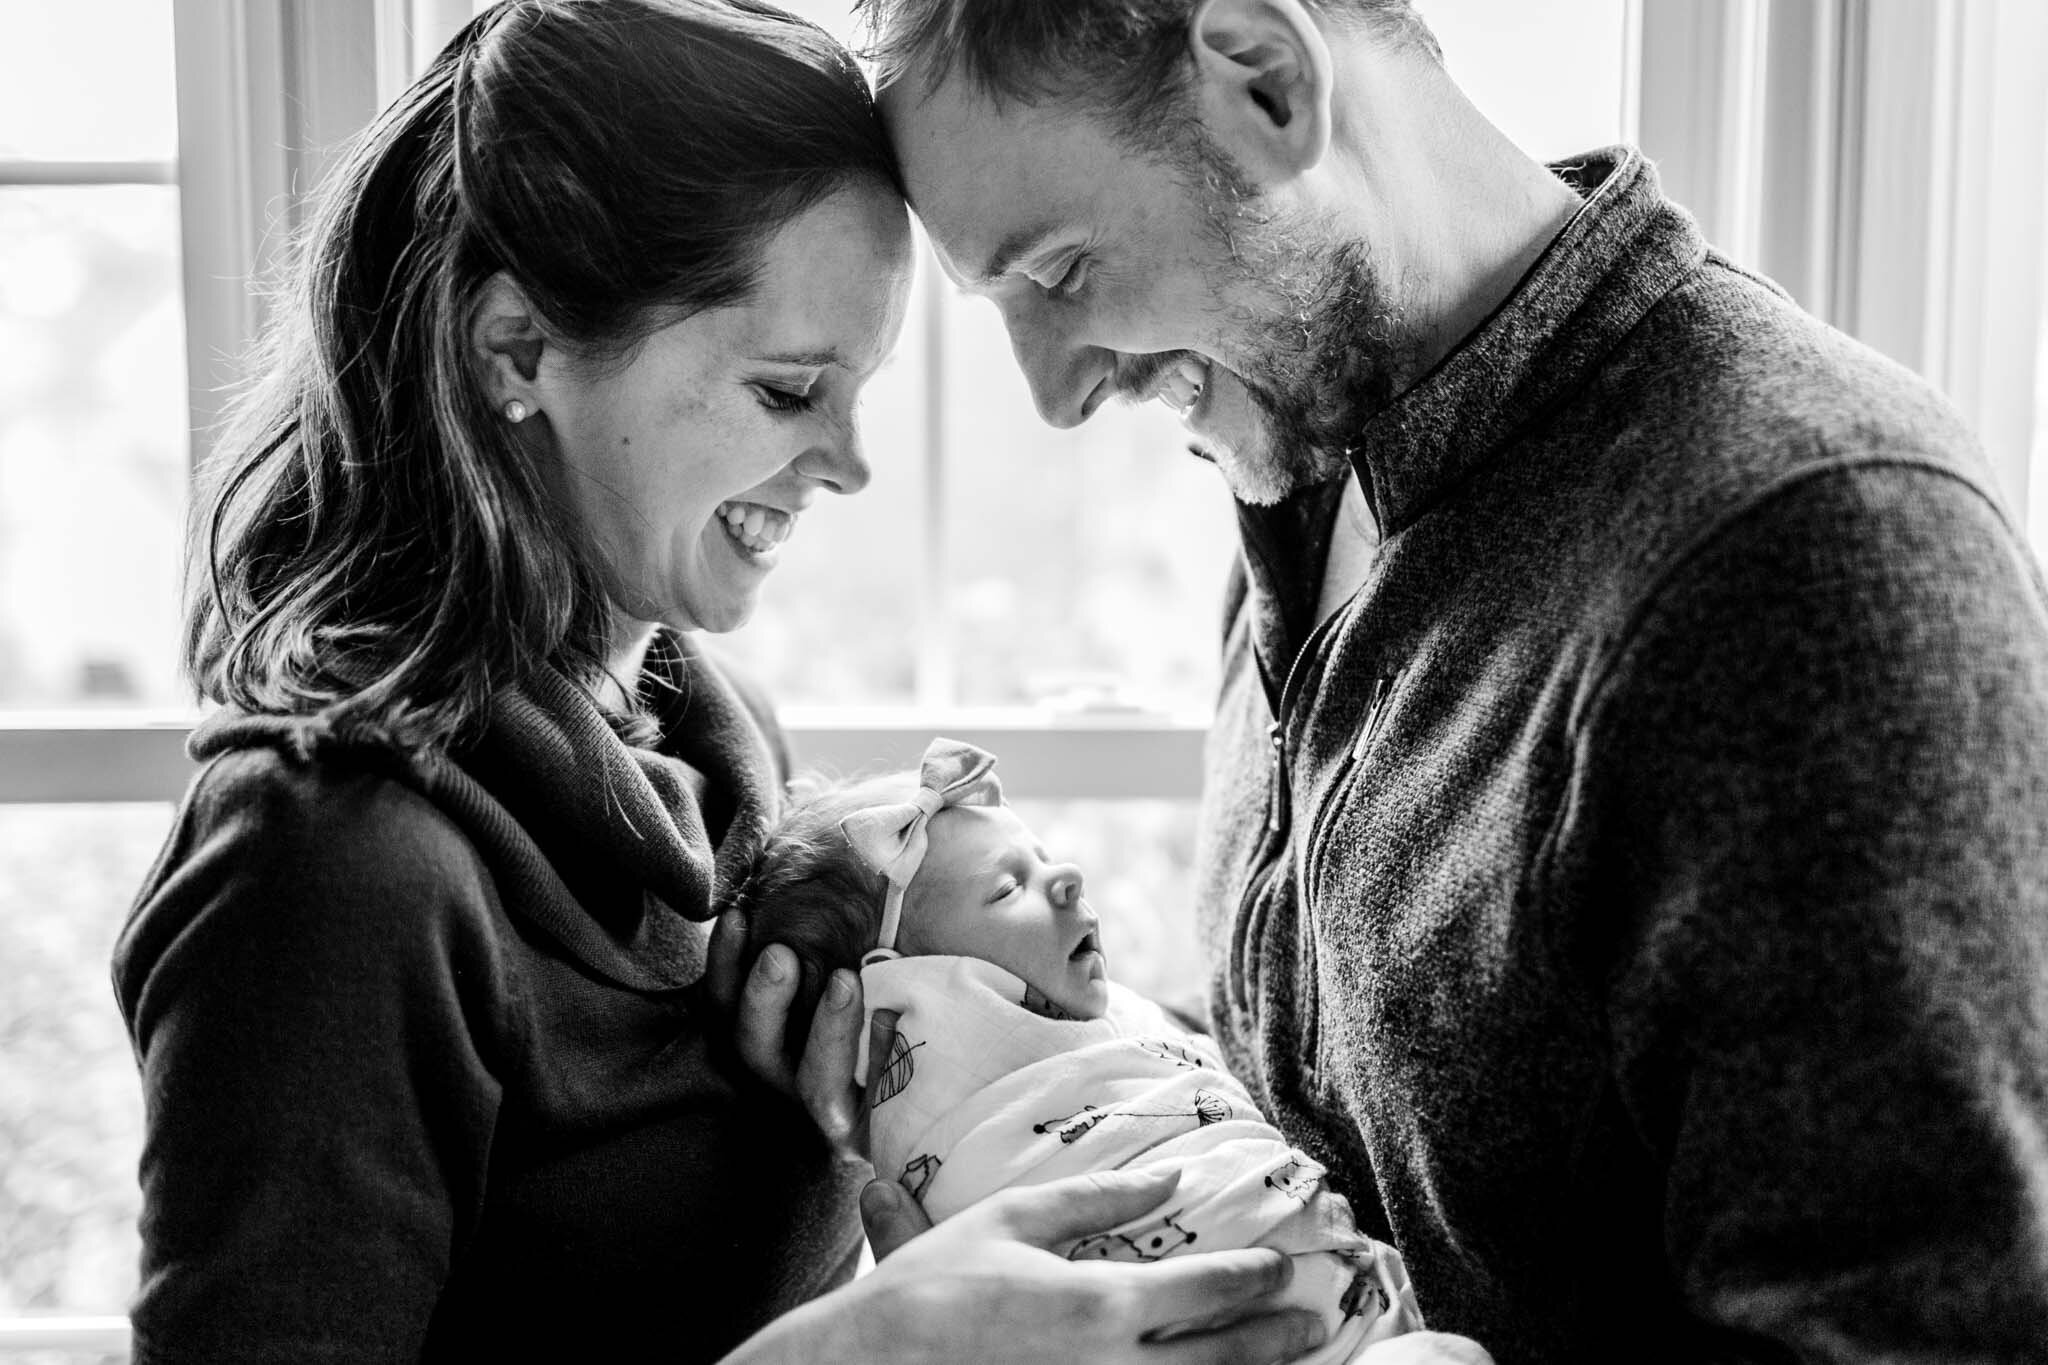 Durham Newborn Photographer | By G. Lin Photography | Black and white image of man and woman holding baby while standing in front of large window